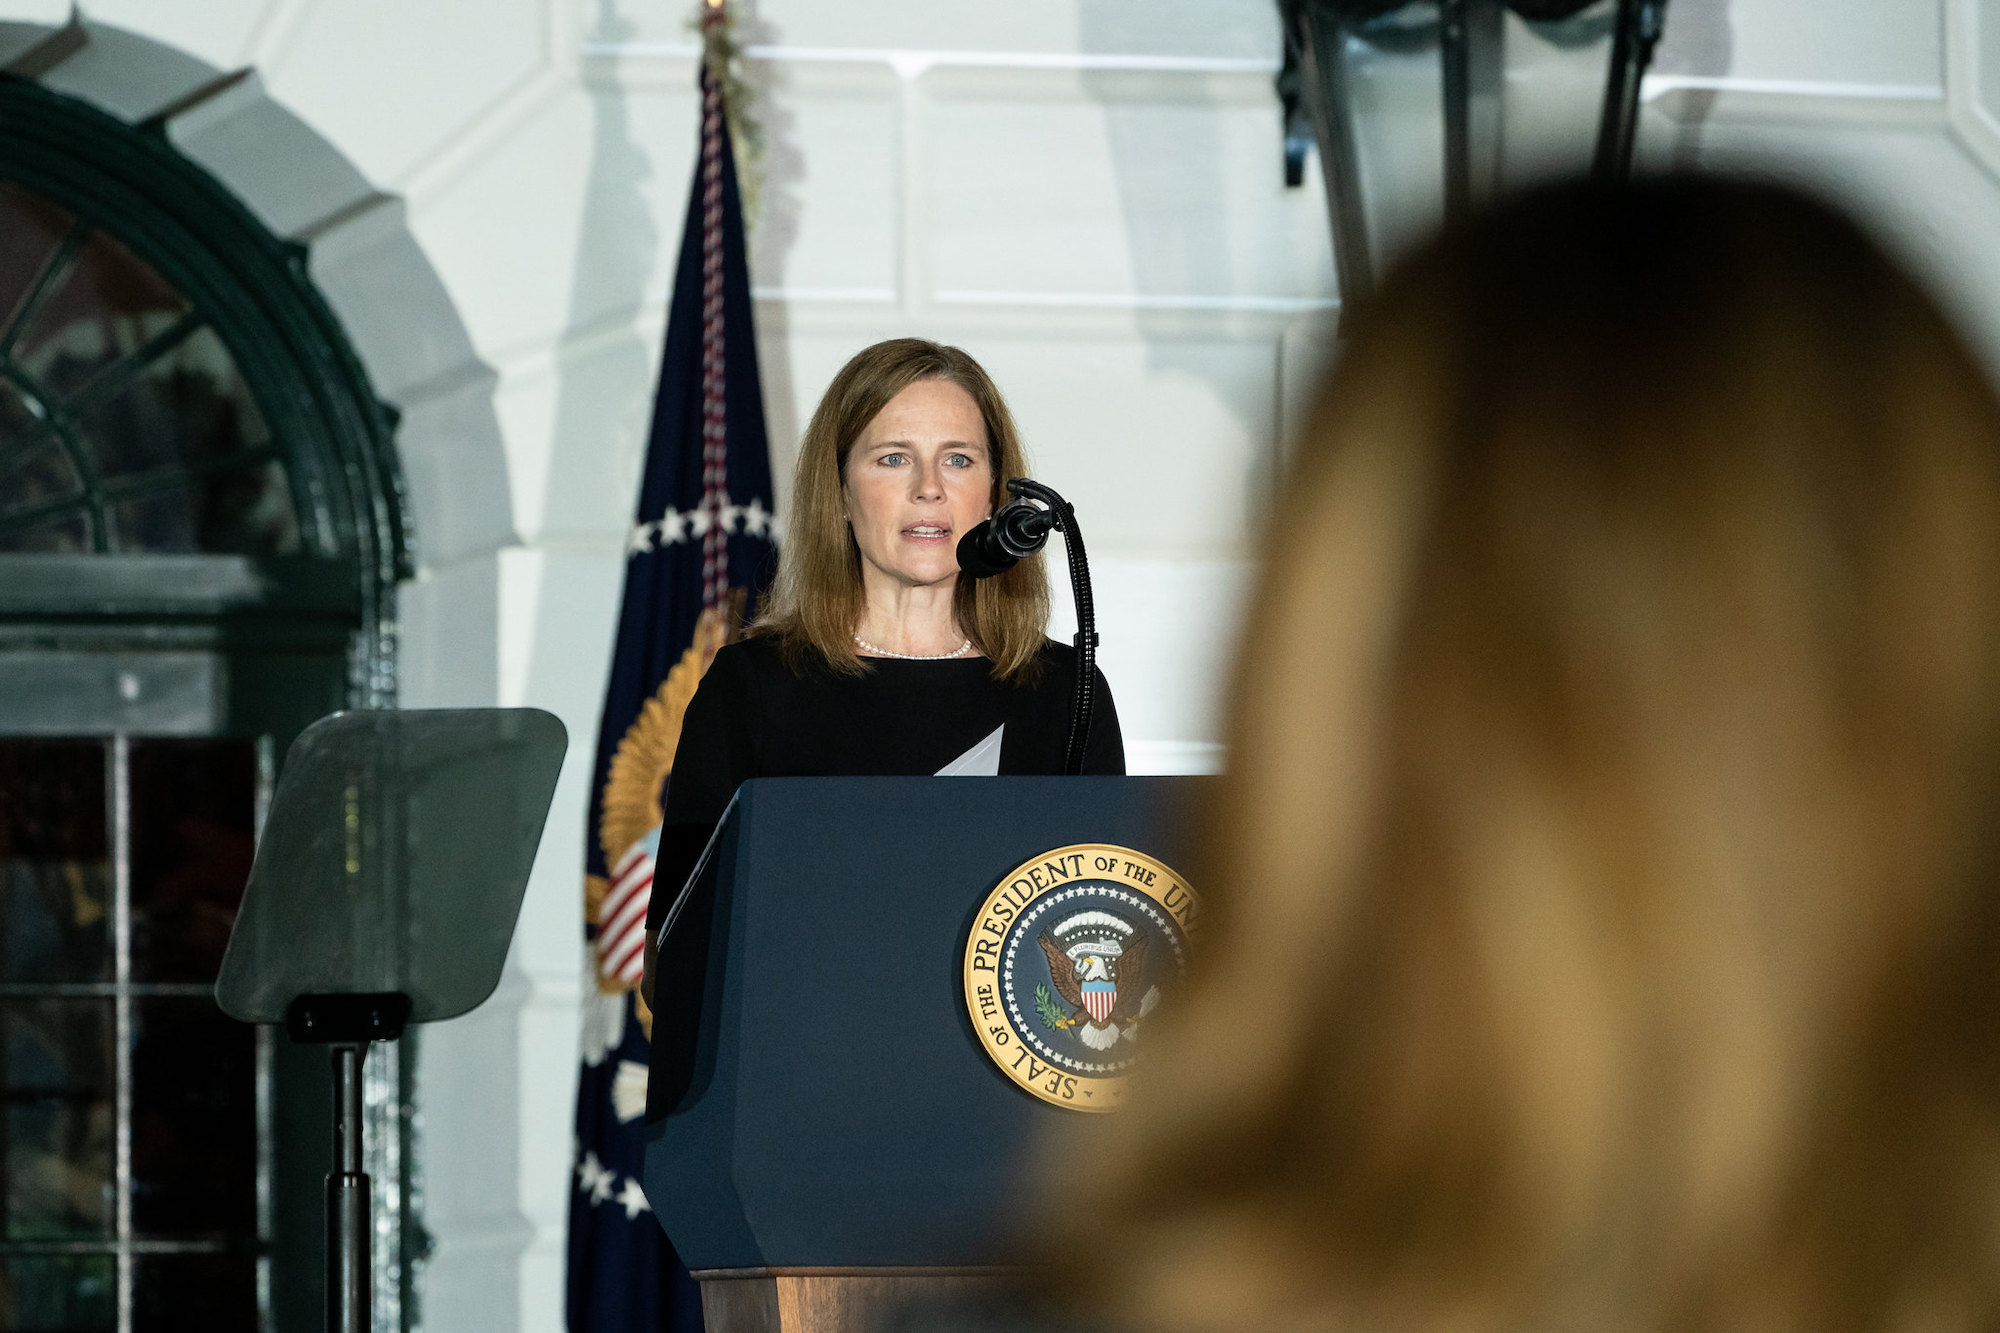 A photo of Amy Coney Barrett standing in front of the presidential seal